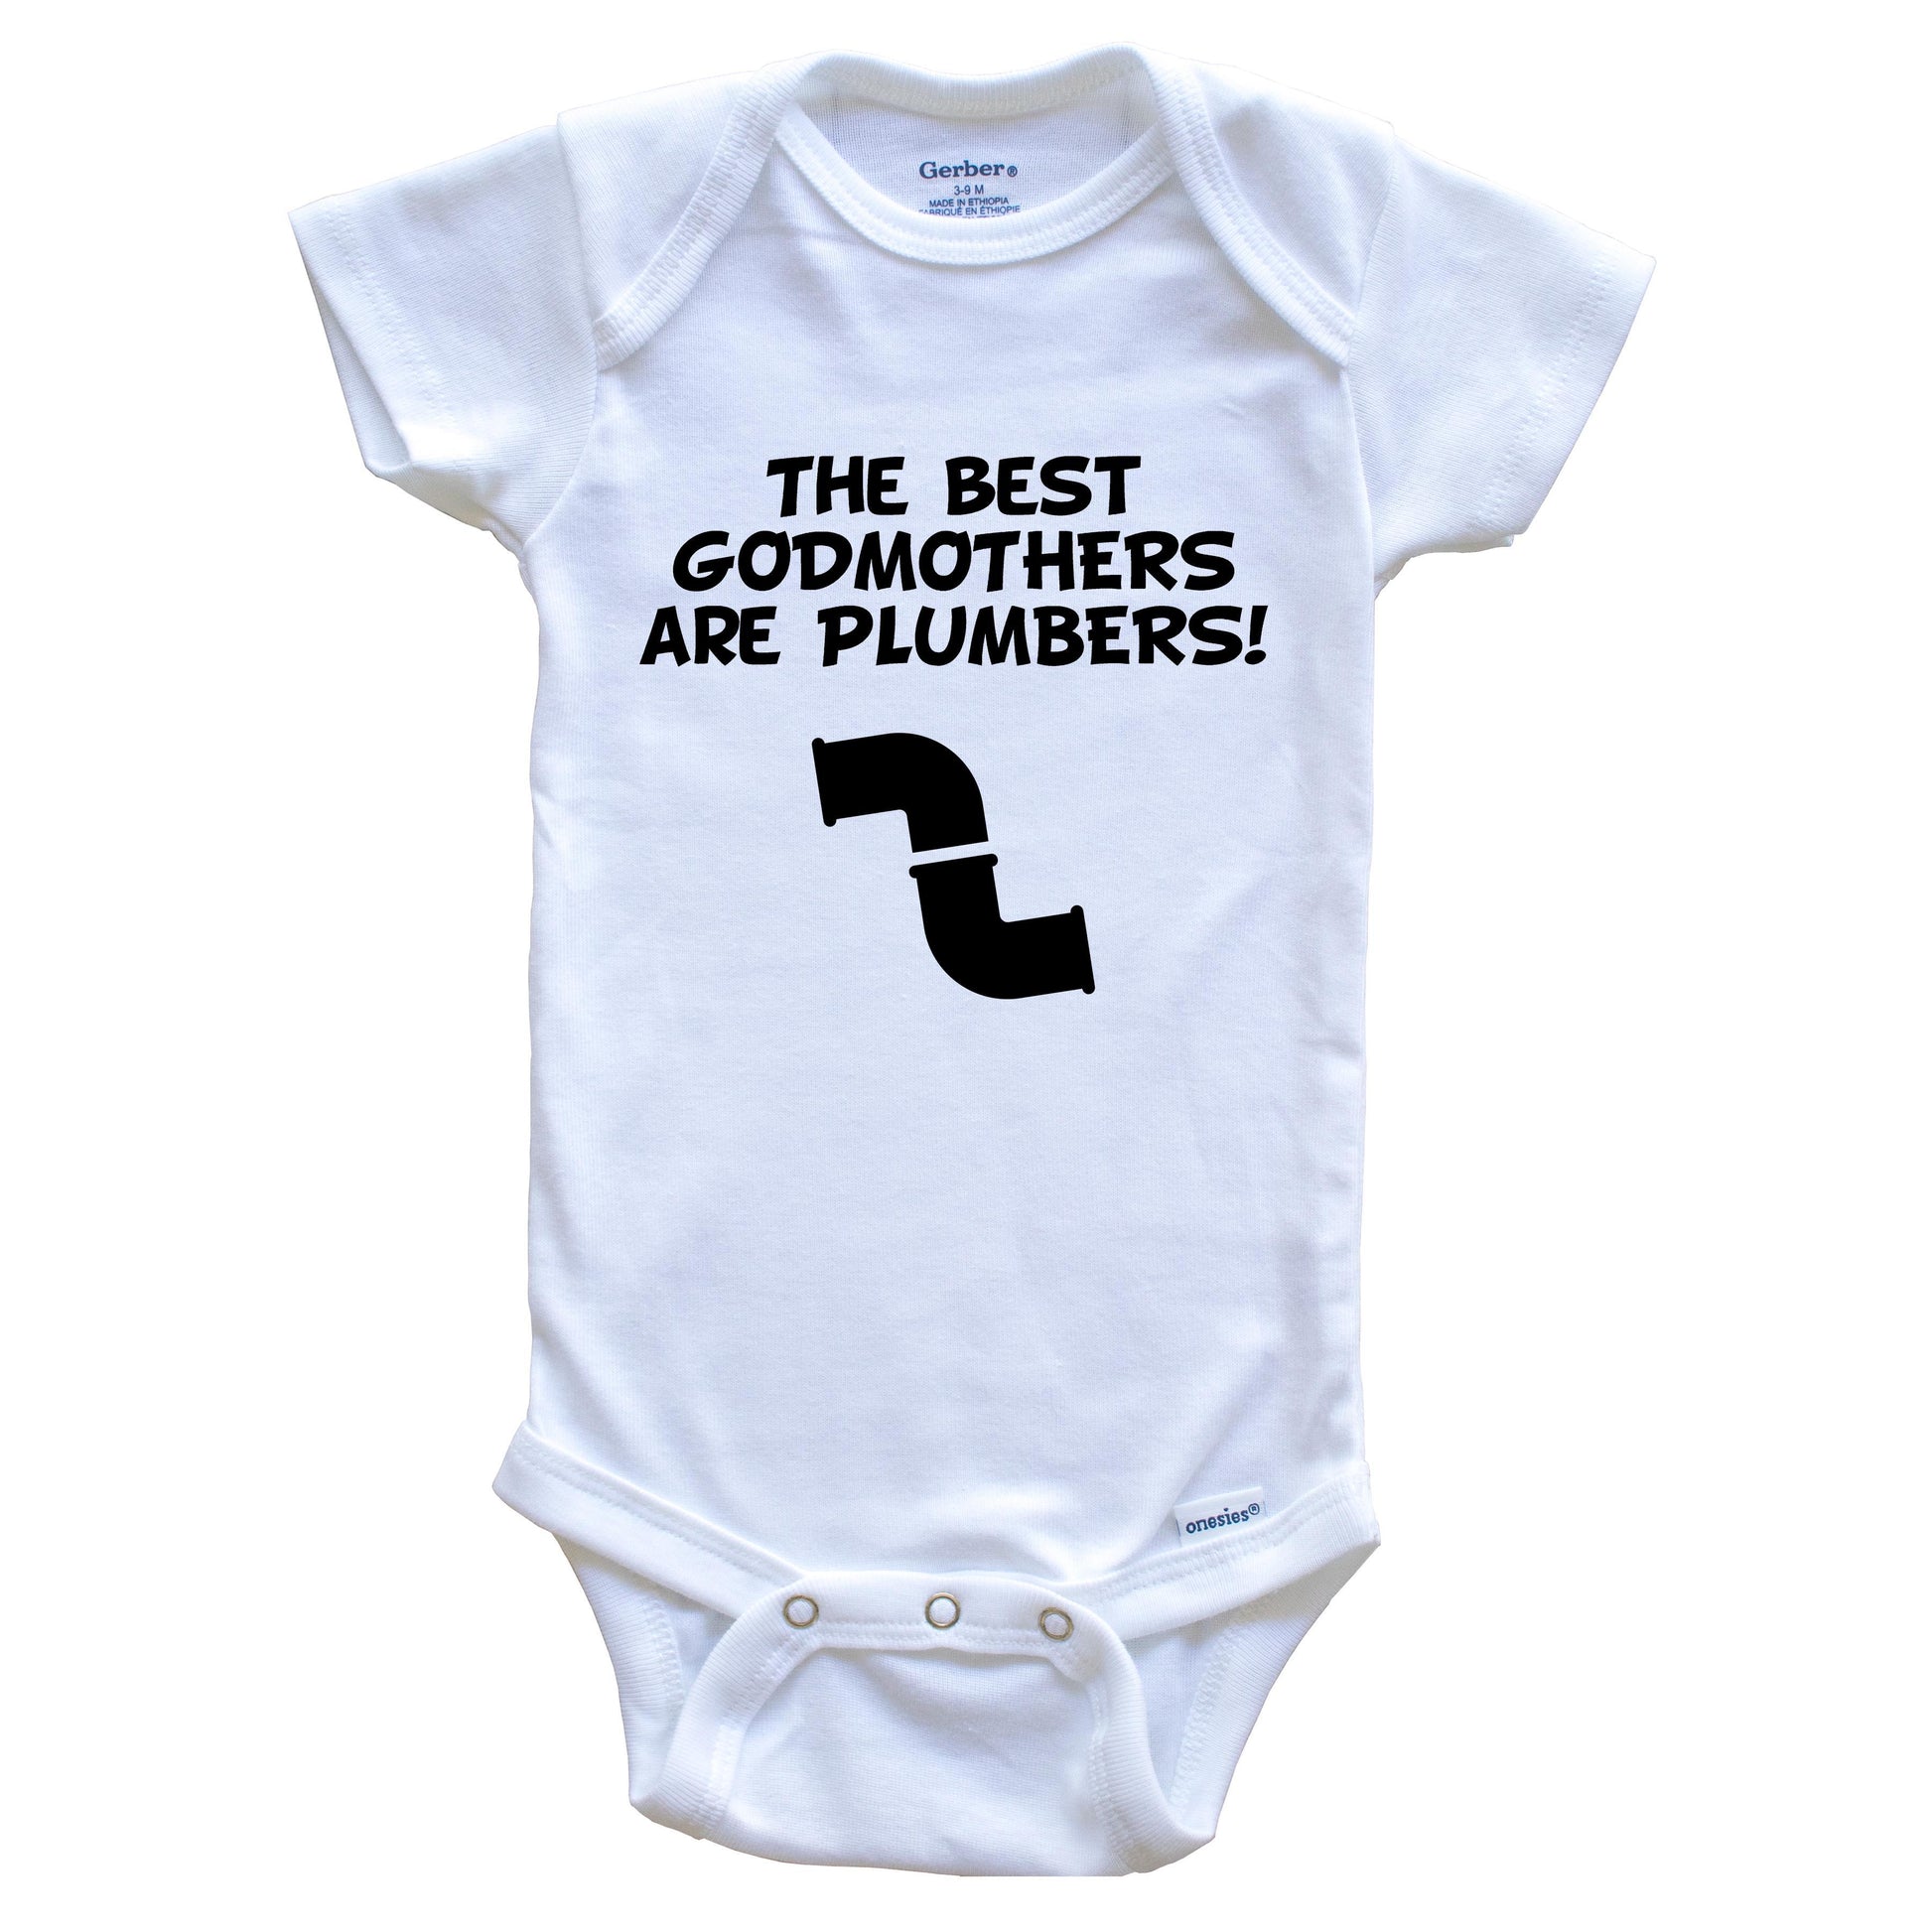 The Best Godmothers Are Plumbers Funny Godchild Baby Onesie